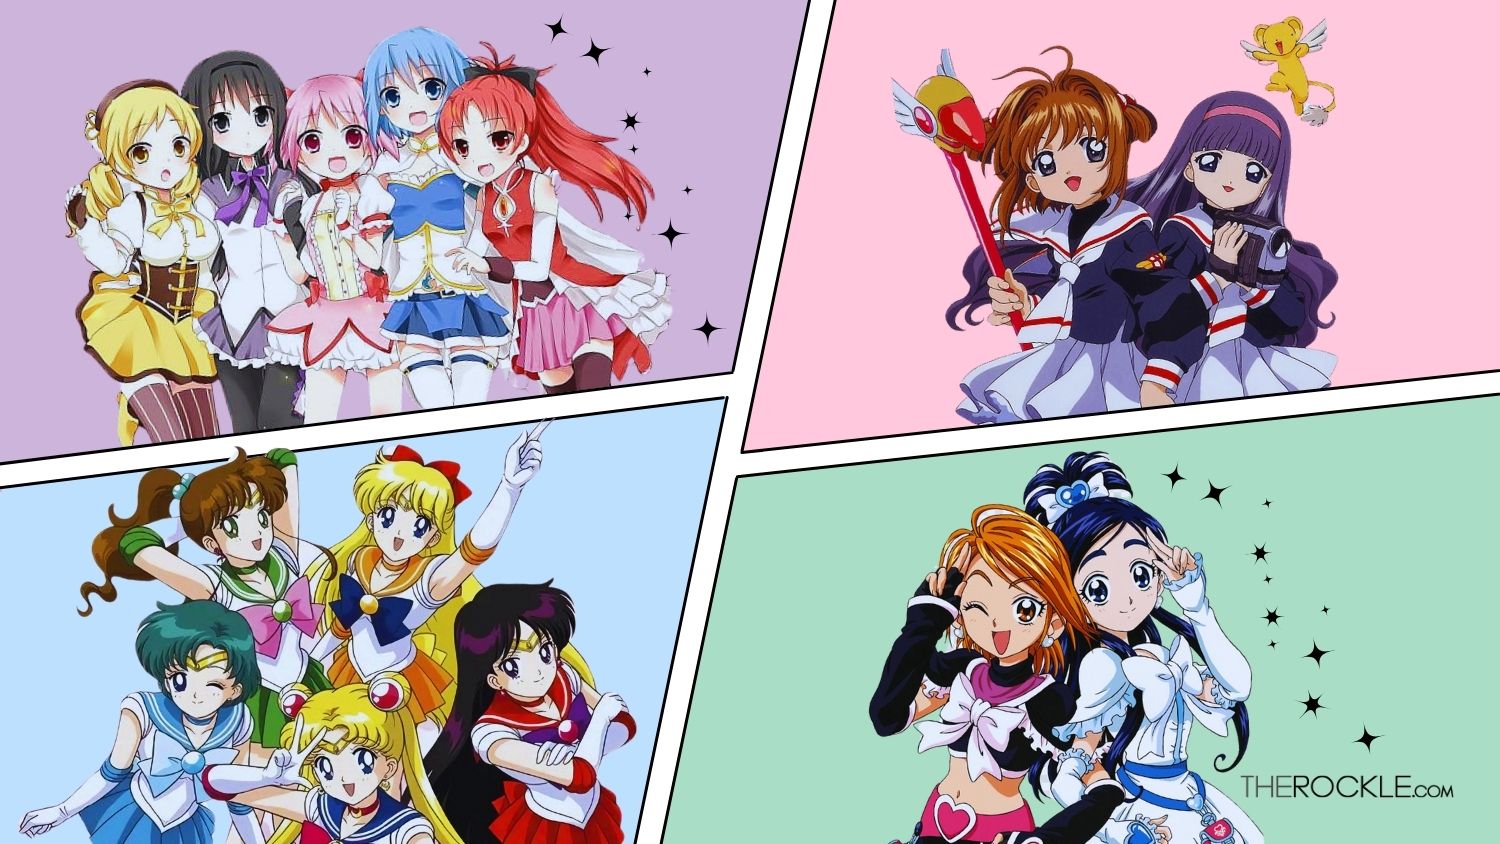 Why Watch Anything Else When You Can Watch These 15 Magical Girl Anime?